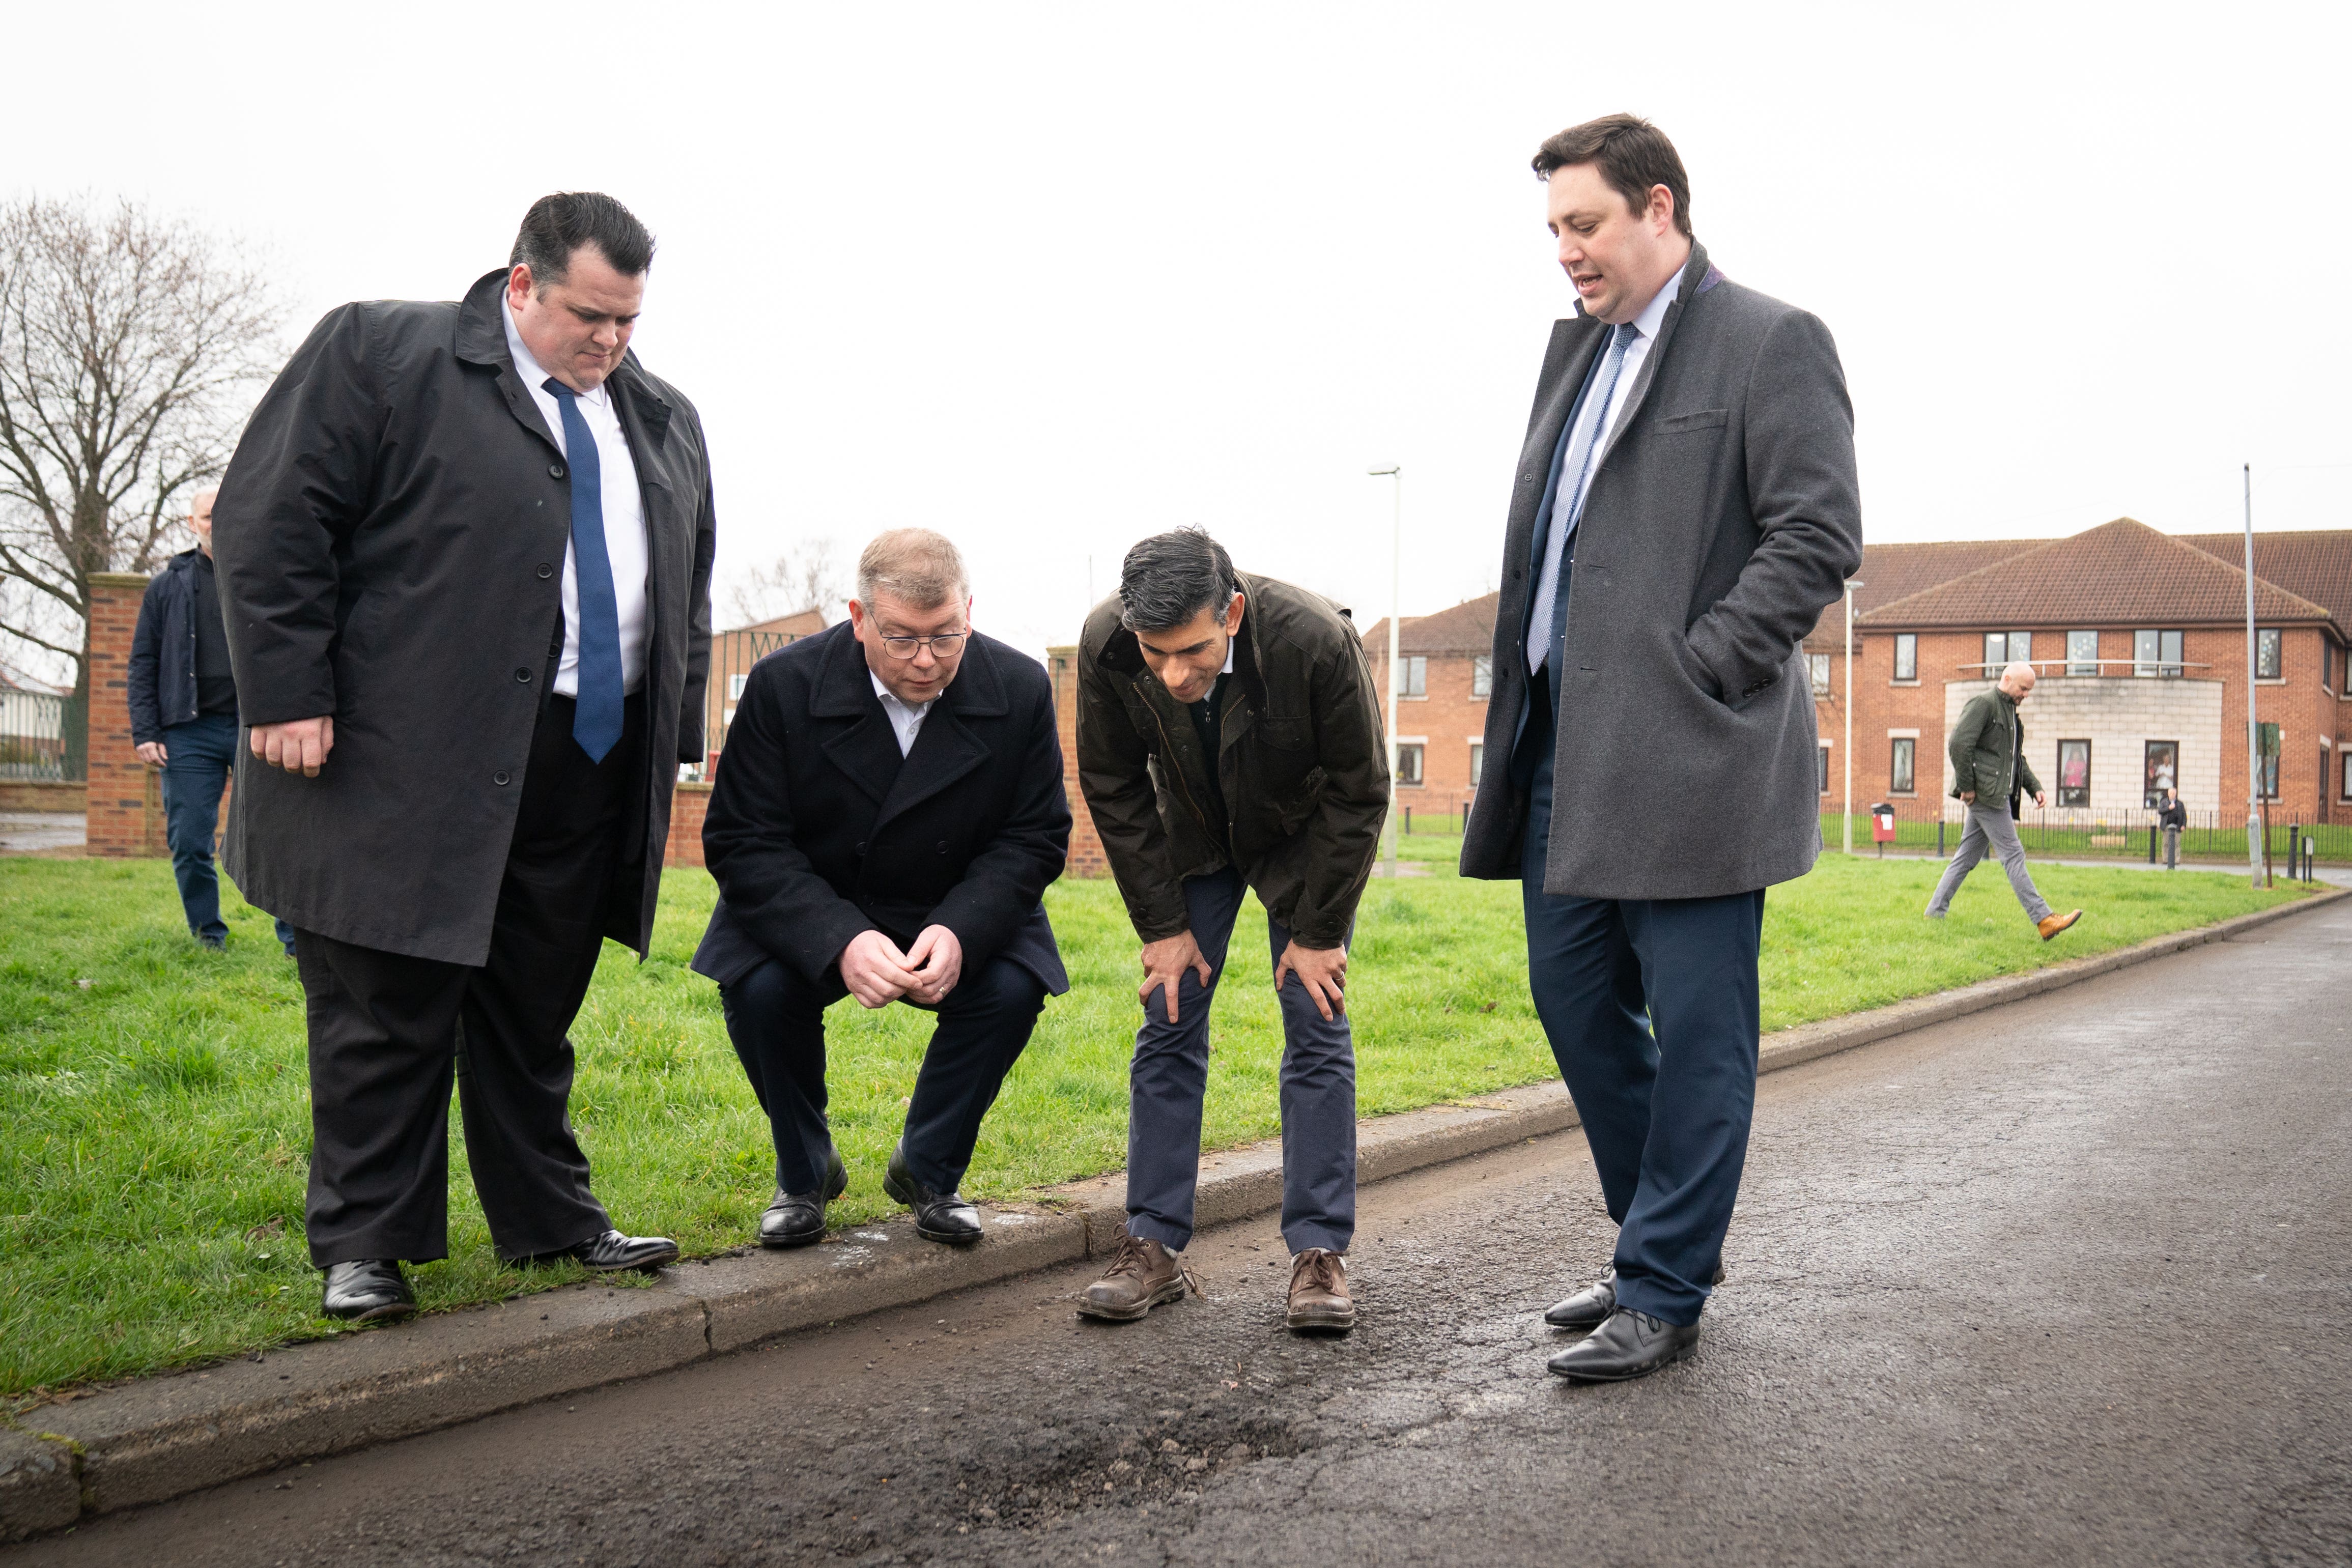 Prime Minister Rishi Sunak with Darlington Council leader Jonathan Dulston (far left), Tees Valley Mayor Ben Houchen (far right) and Darlington MP Peter Gibson (second from left) in Firth Moor during a visit to Darlington, County Durham where he discussed local issues and how money announced in this year’s budget would be spent on fixing the region’s roads and repairing potholes (Stefan Rousseau/PA)